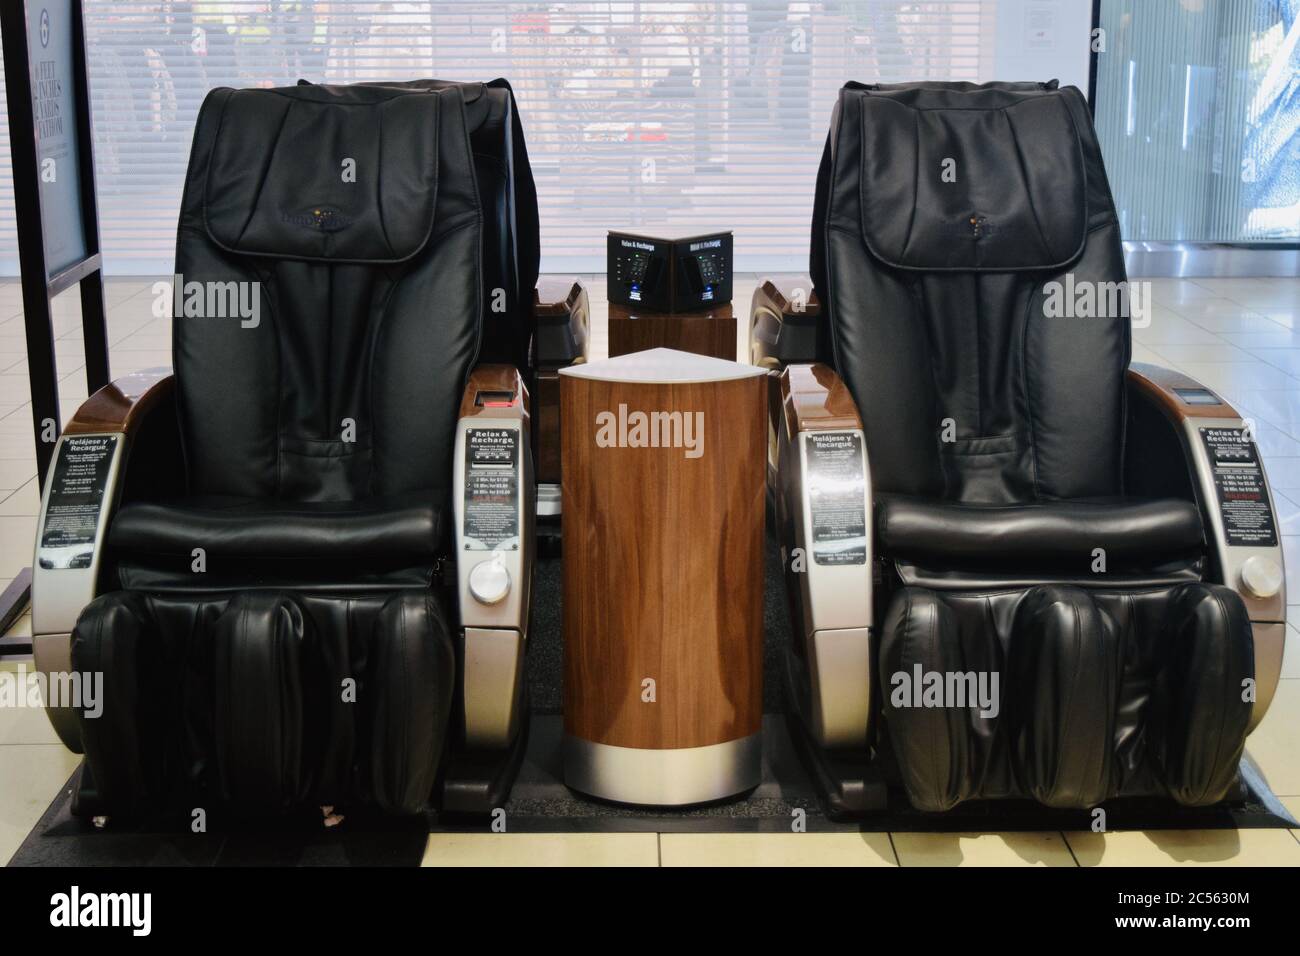 Black Massage Chairs In The Shopping Mall Stock Photo Alamy